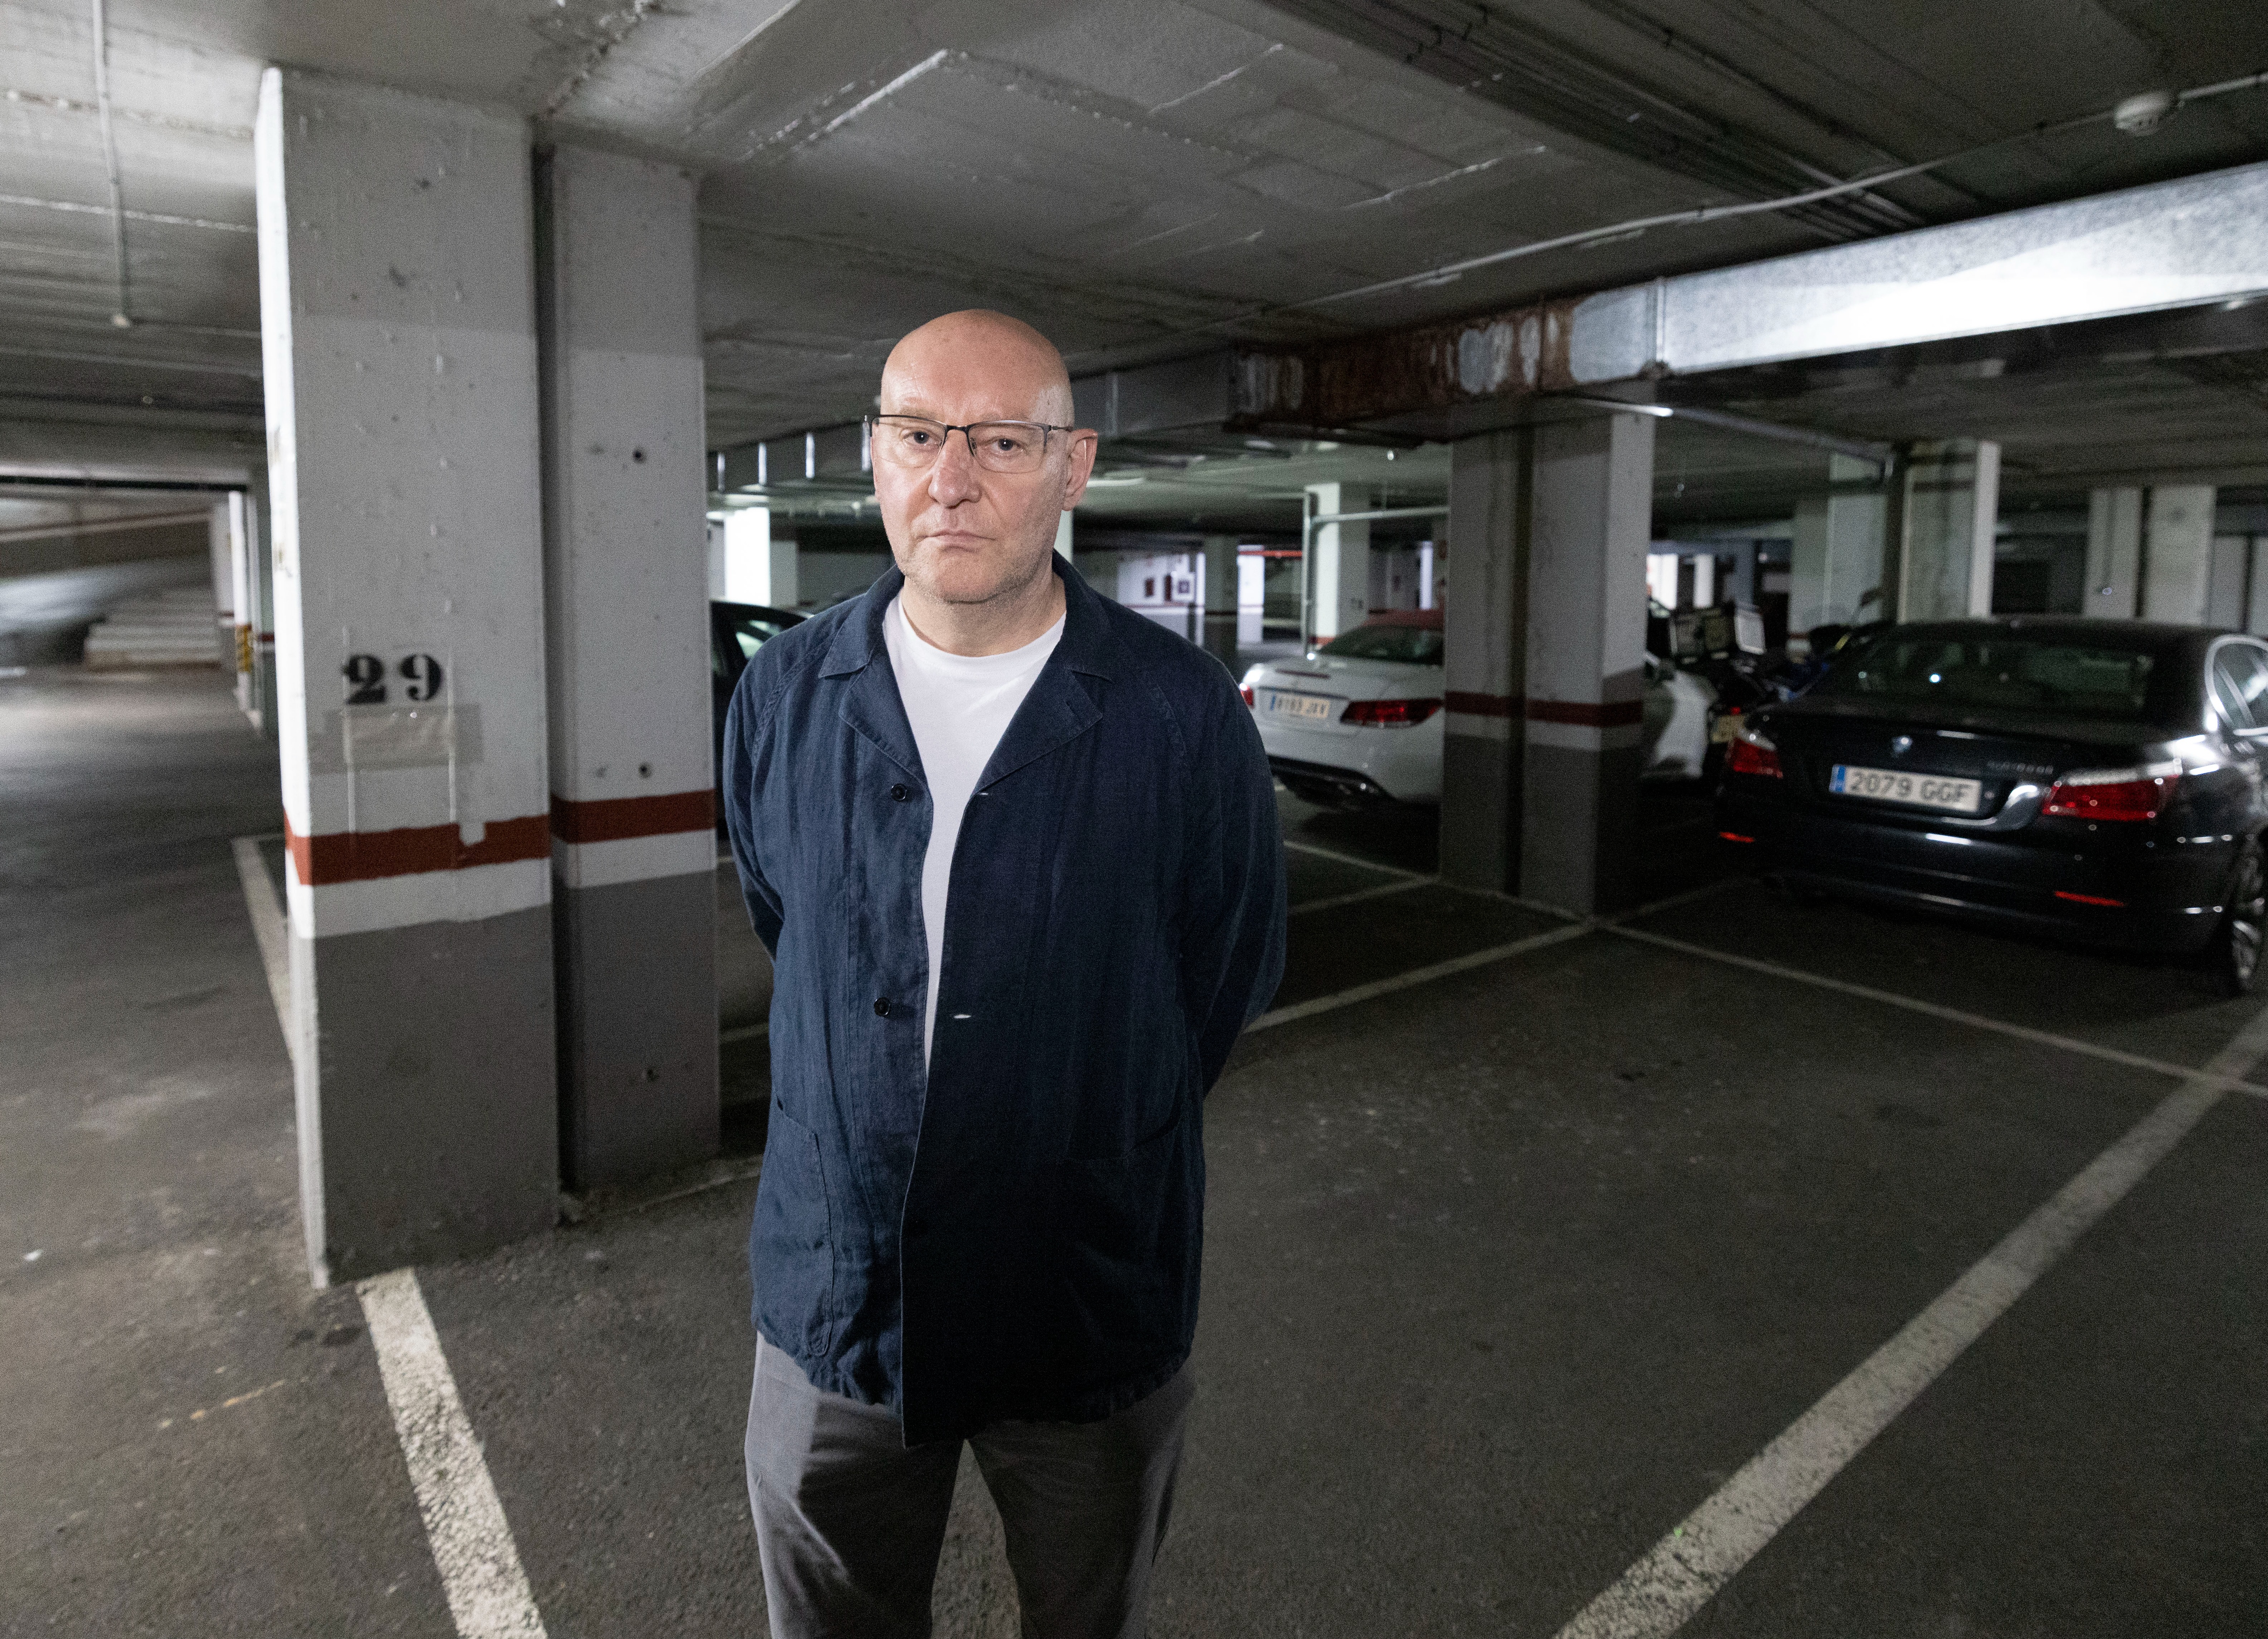 The Sun's Nick Parker stands in murdered Russian pilot Captain Maxim Kuzminov's parking space in the underground car park where his body was found